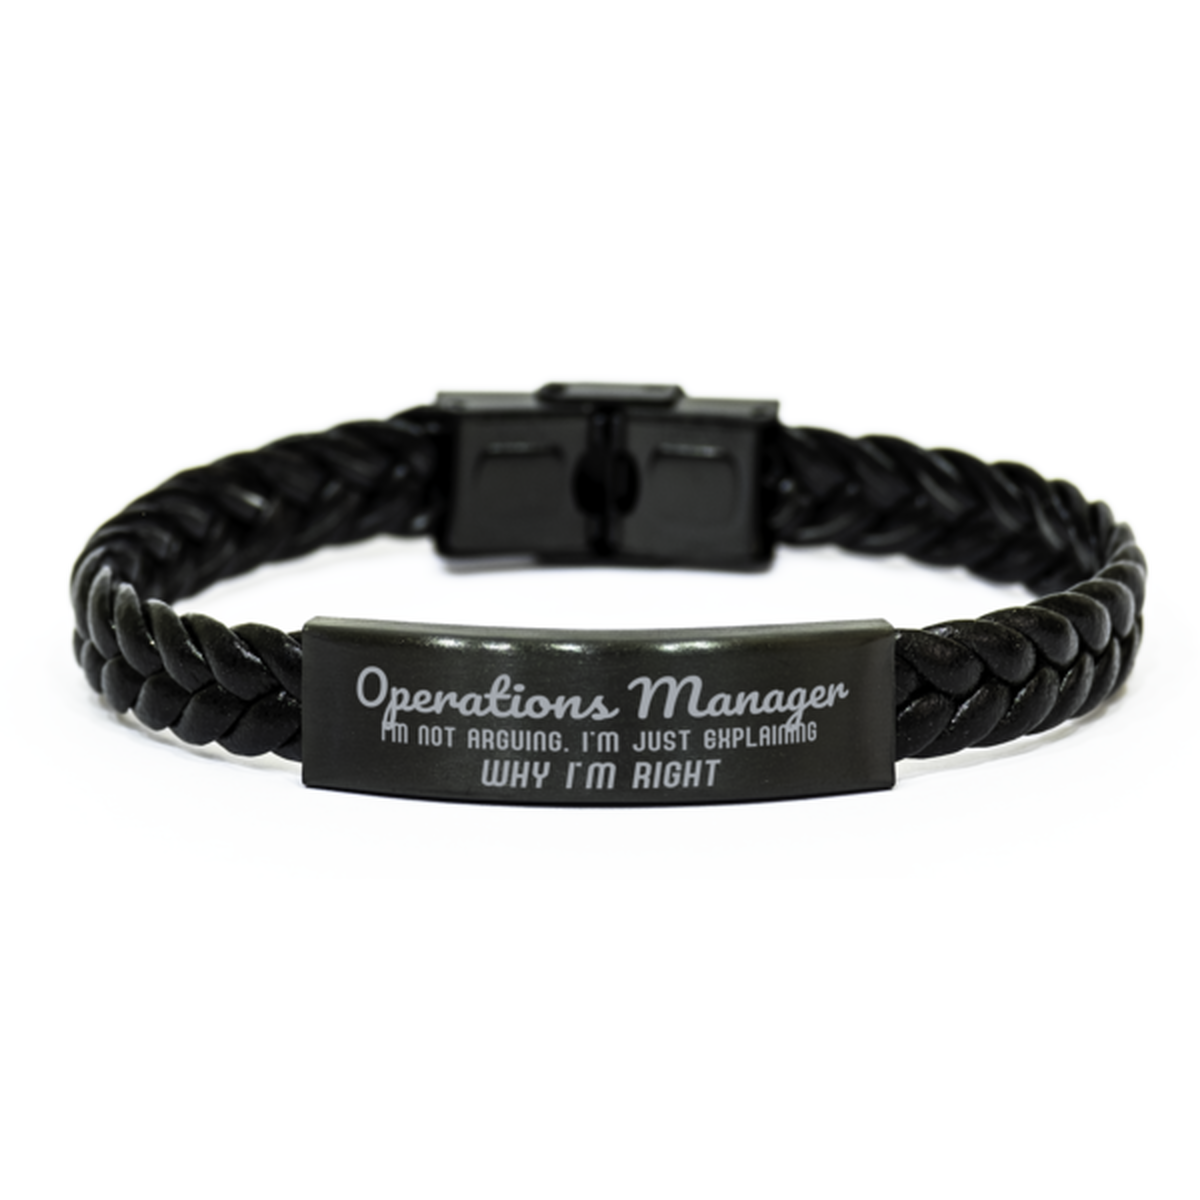 Operations Manager I'm not Arguing. I'm Just Explaining Why I'm RIGHT Braided Leather Bracelet, Graduation Birthday Christmas Operations Manager Gifts For Operations Manager Funny Saying Quote Present for Men Women Coworker